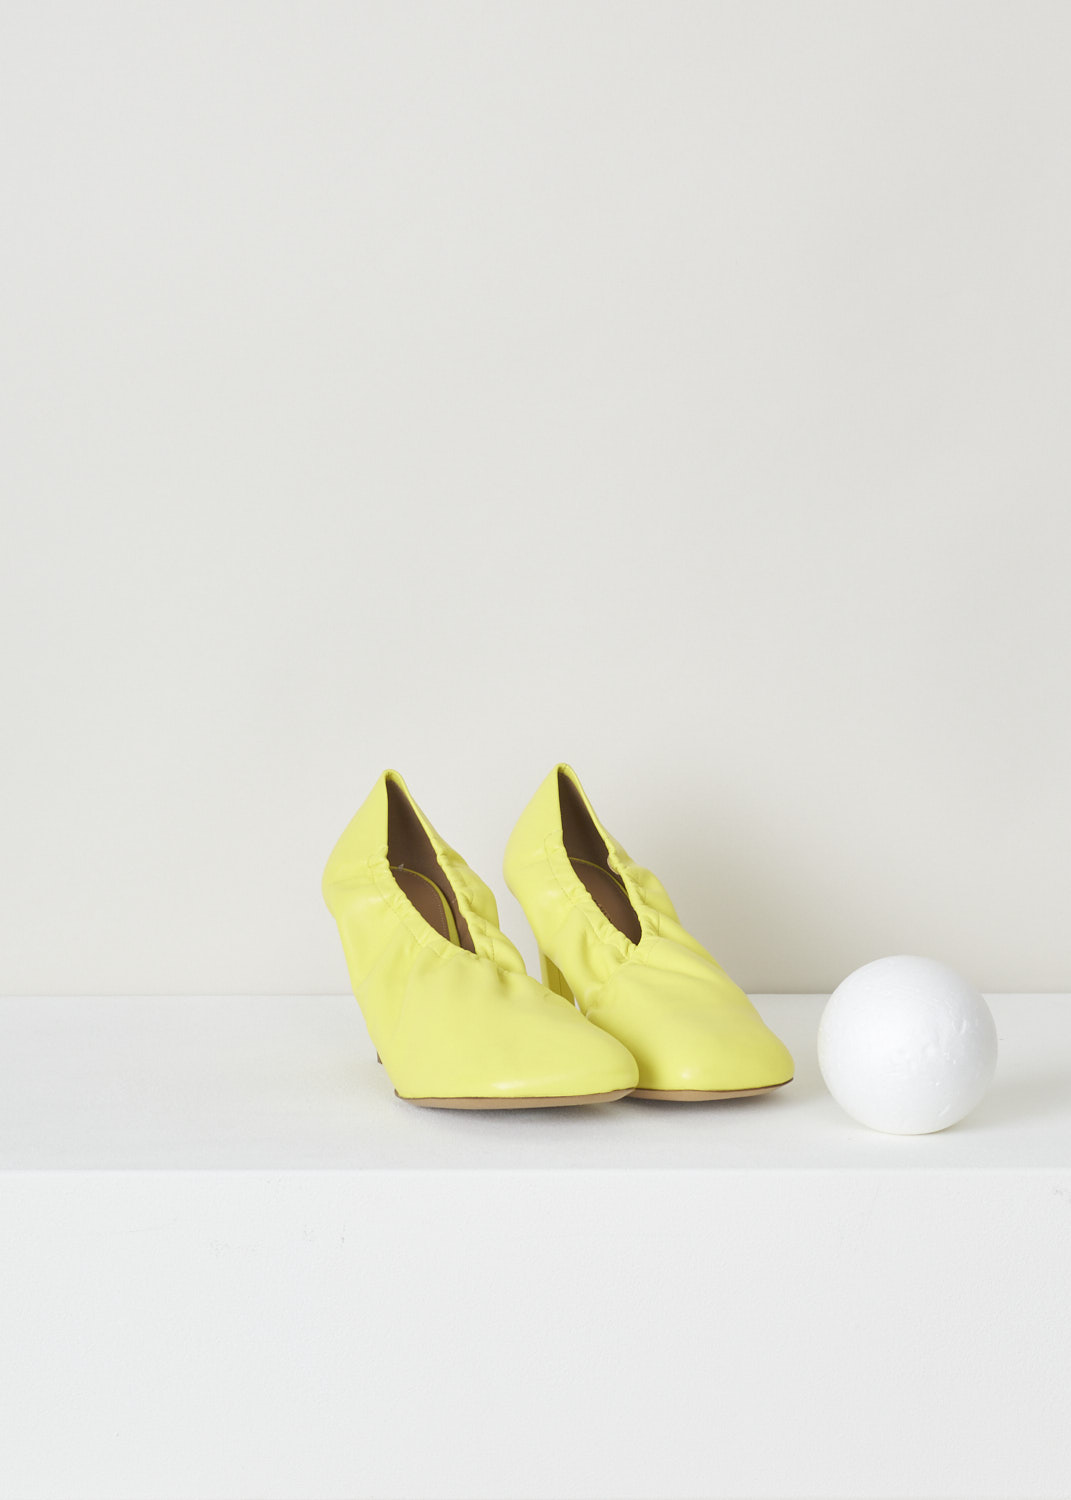 Dries van Noten, Yellow pump with an elastic fold-over vamp, WS211_138_H80_QU132_lime201, yellow, front, Yellow pumps made entirely out of soft and smooth calfskin. A quirky feature on this model is the elastic topline which folds over the toe vamp, ensuring a unique design feature. The toe vamp comes in a square format. Furthermore the heel is covered in yellow coloured leather.

Heel height: 7.5 cm / 2.95 inch.